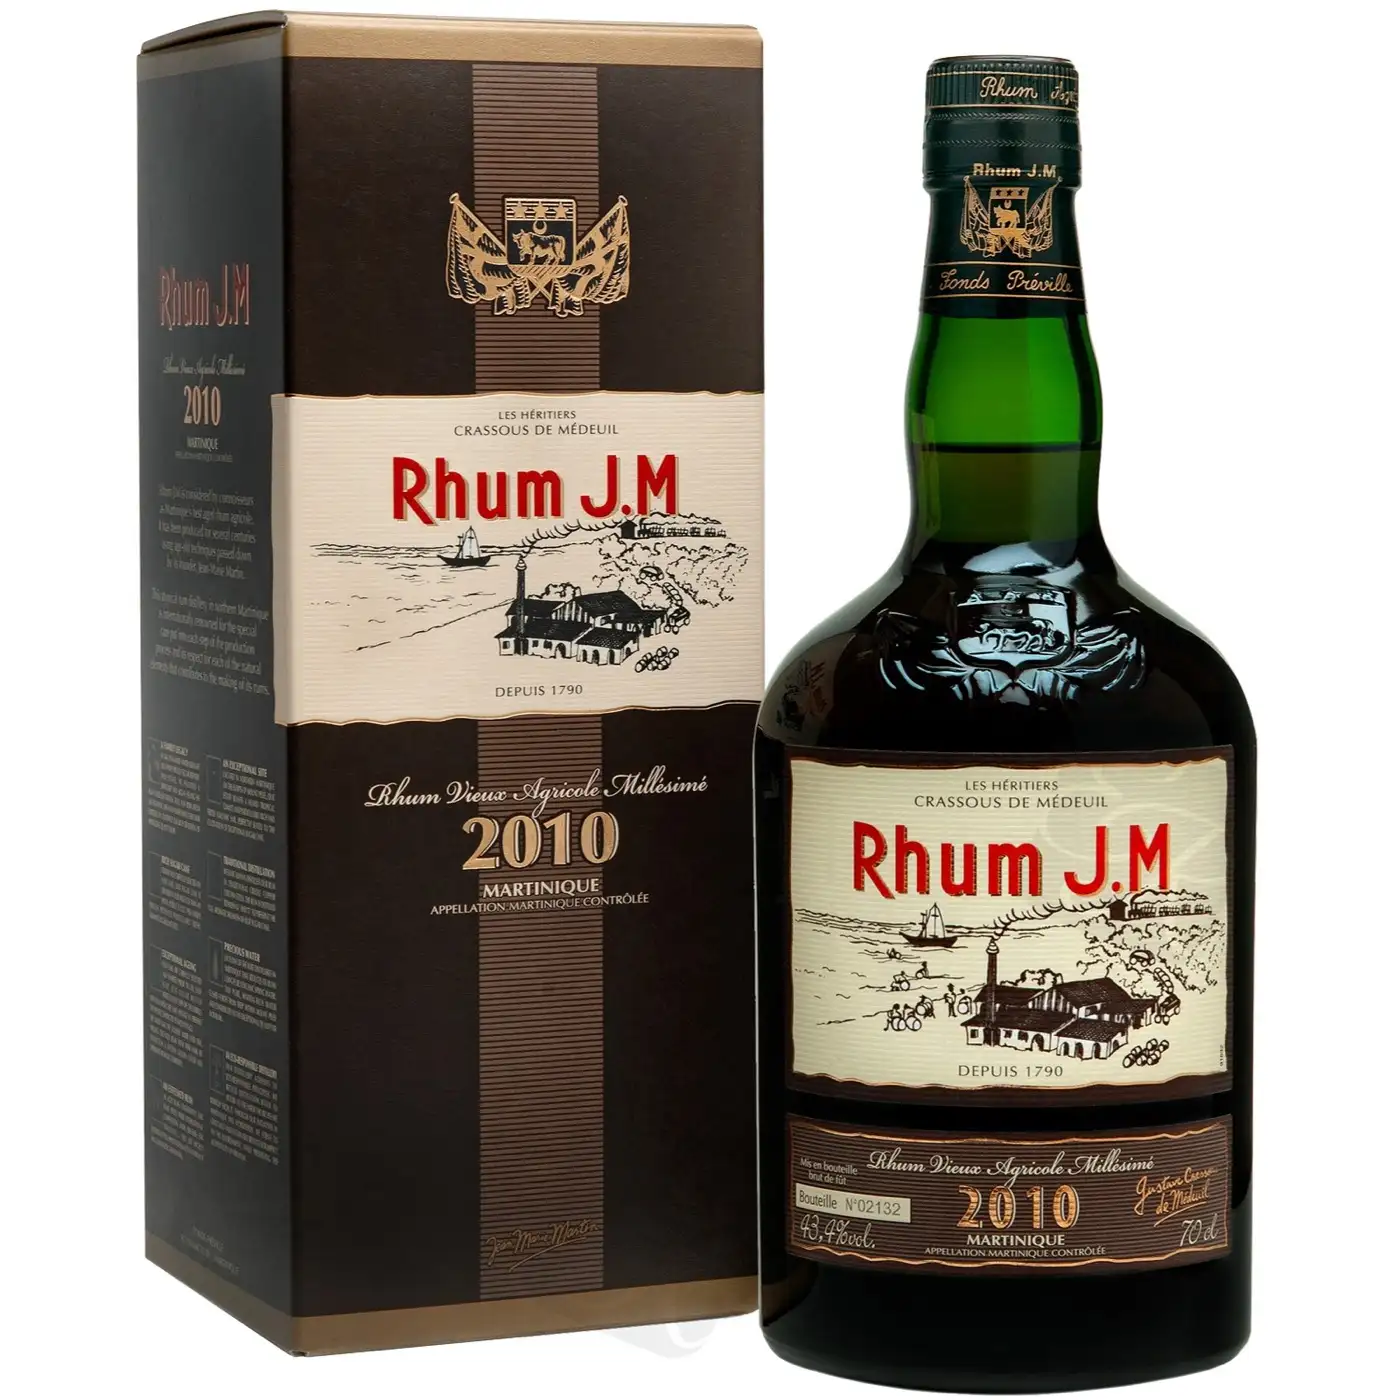 Image of the front of the bottle of the rum 2010